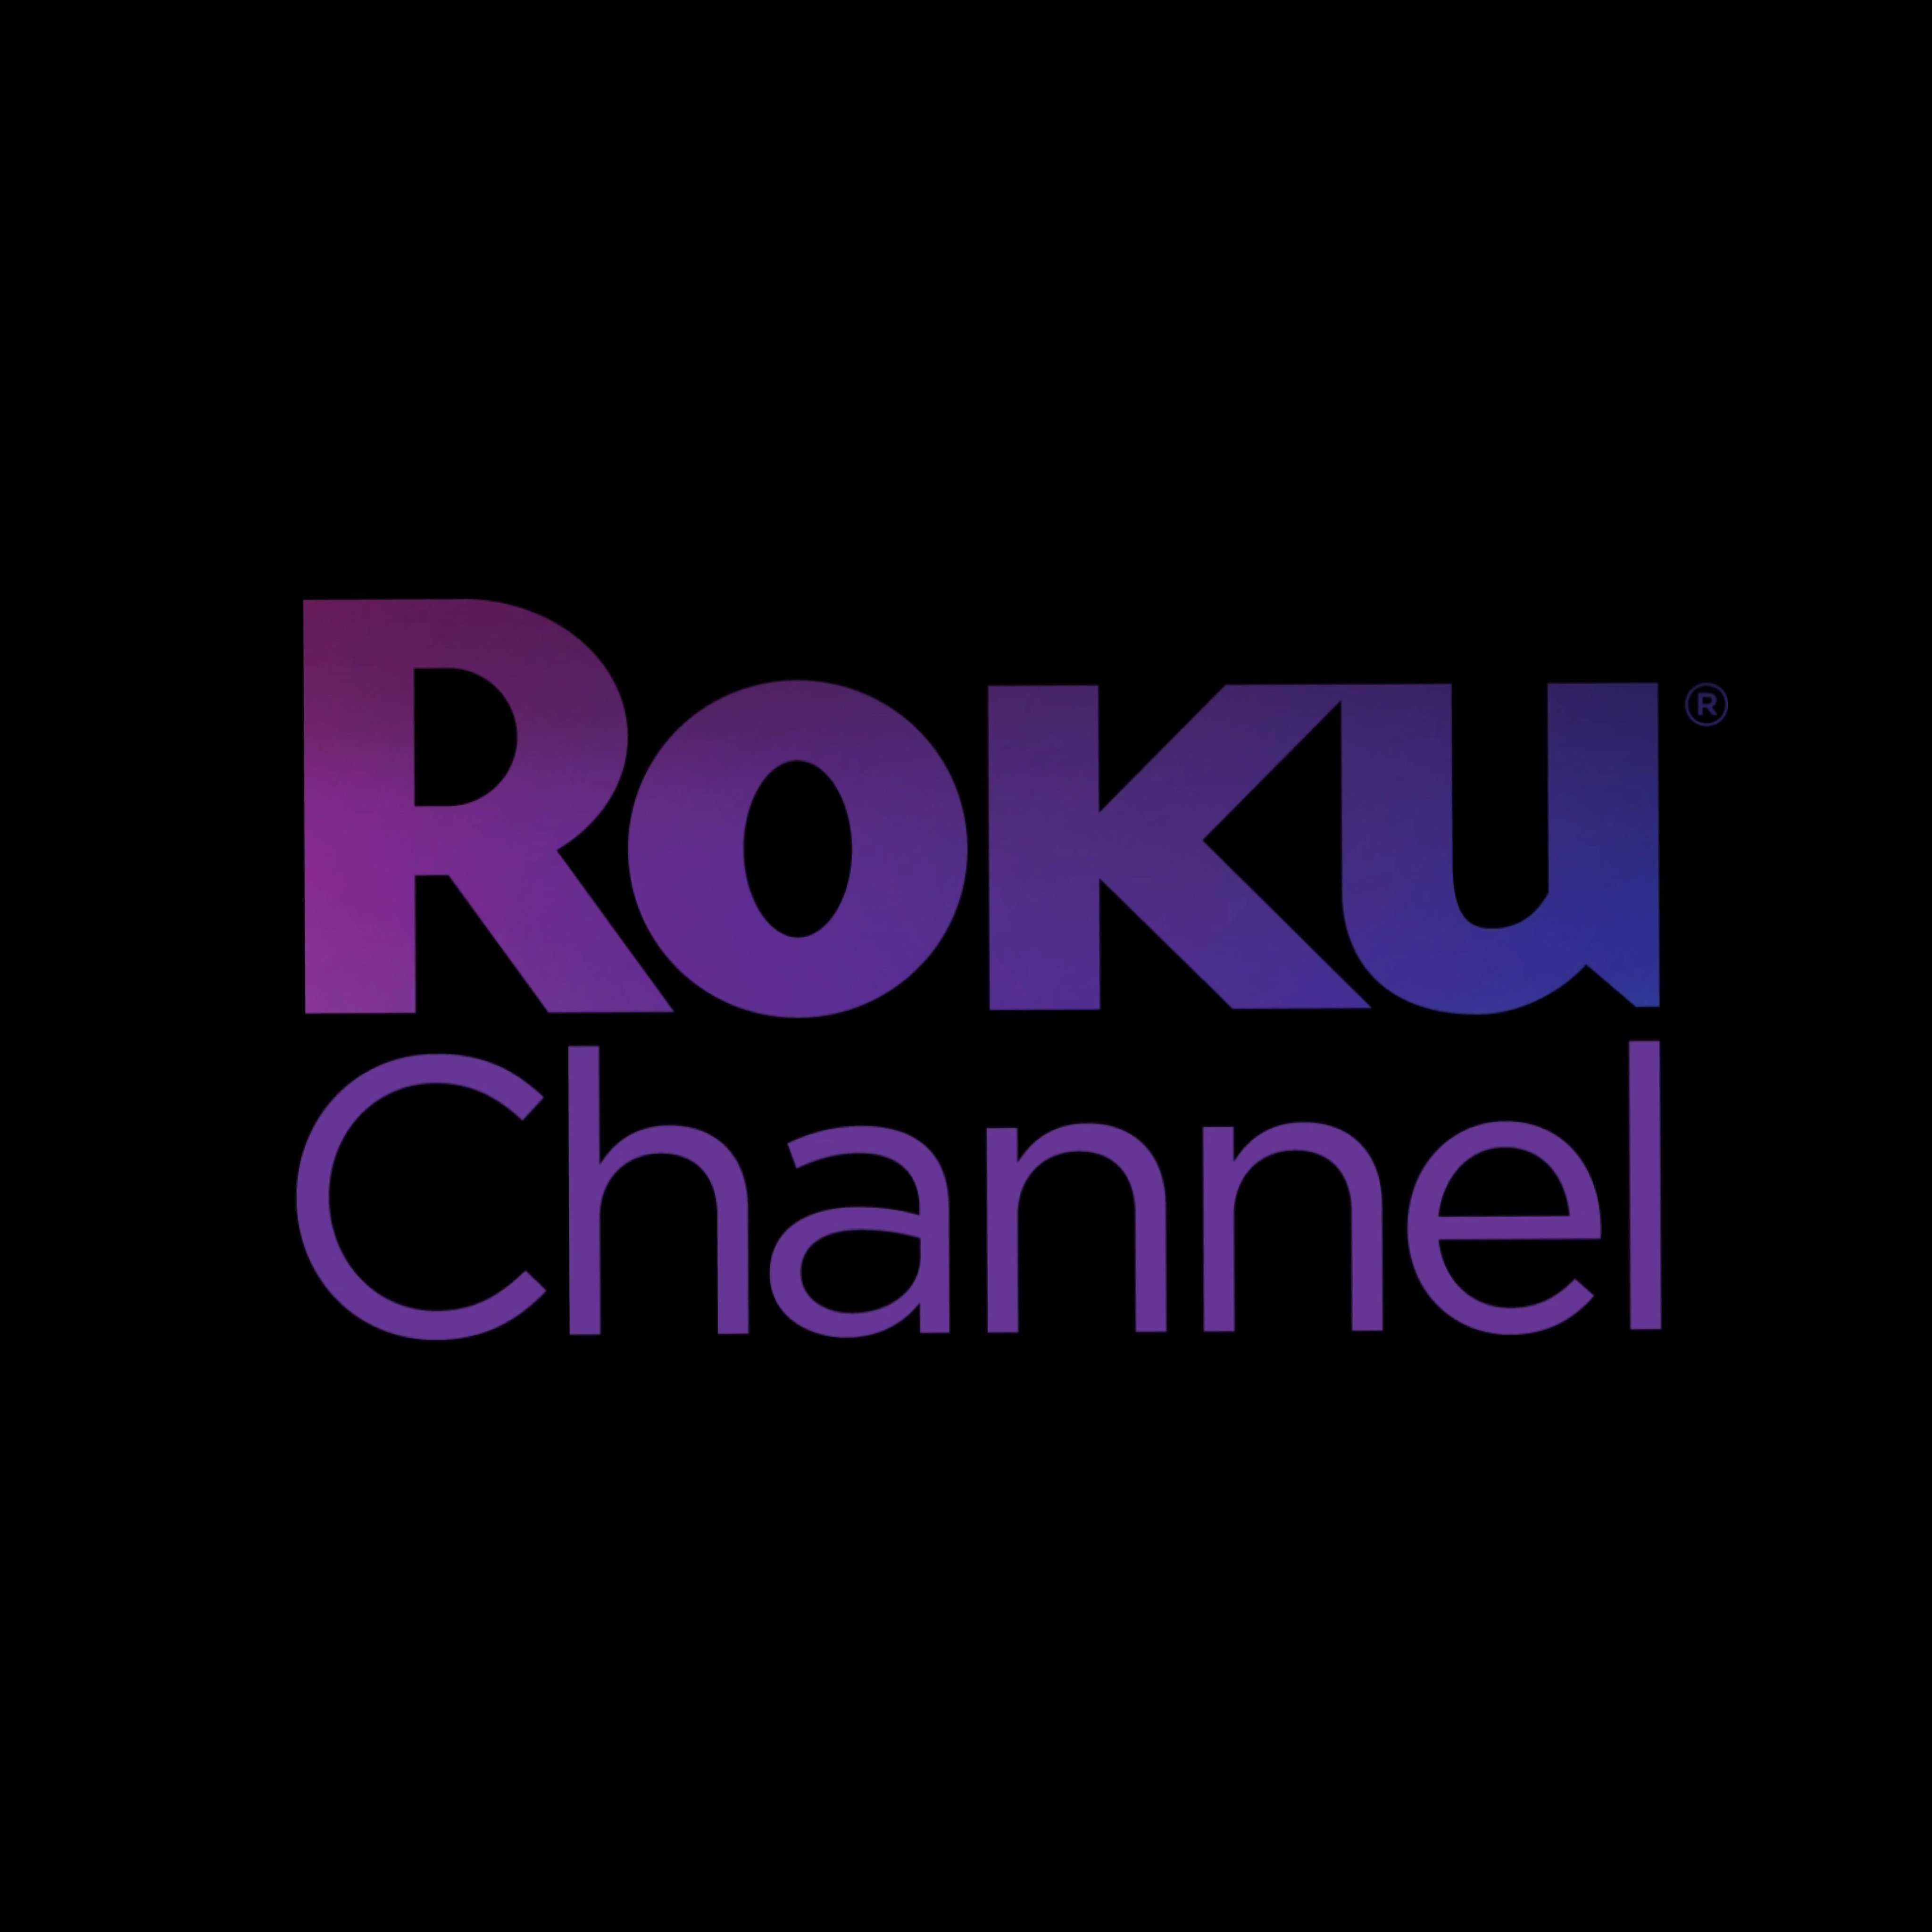 Demi Lovato Announces A Very Demi Holiday Music Special for Roku